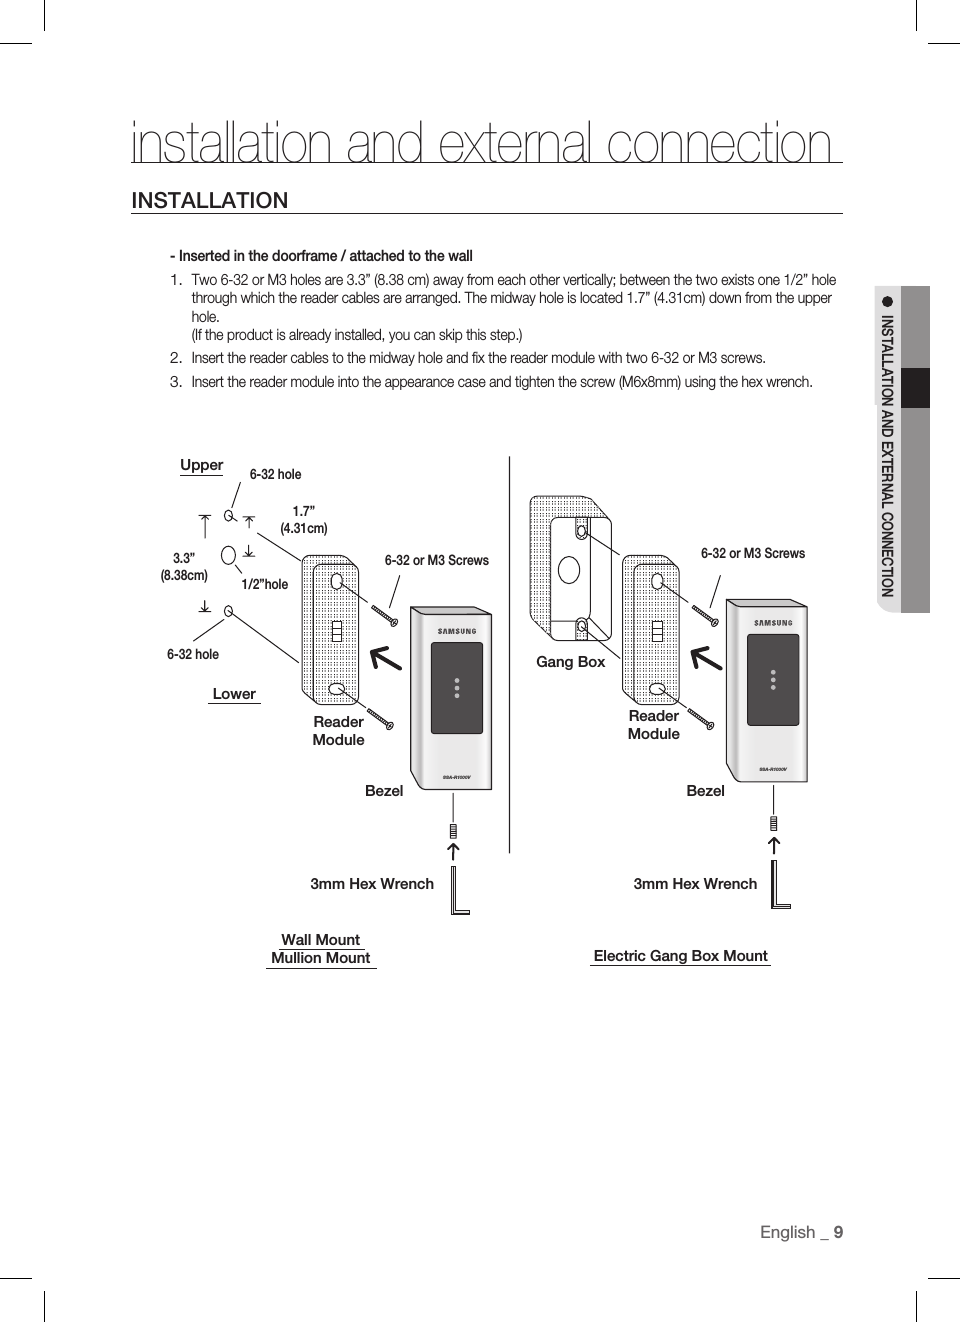 EnglisEnglish _ 9INSTALLATION AND EXTERNAL CONNECTIONSSA-R1000VSSA-R1000Vinstallation and external connectionINSTALLATION- Inserted in the doorframe / attached to the wallTwo 6-32 or M3 holes are 3.3” (8.38 cm) away from each other vertically; between the two exists one 1/2” hole through which the reader cables are arranged. The midway hole is located 1.7” (4.31cm) down from the upper hole.(If the product is already installed, you can skip this step.)Insert the reader cables to the midway hole and ﬁ x the reader module with two 6-32 or M3 screws.Insert the reader module into the appearance case and tighten the screw (M6x8mm) using the hex wrench.1.2.3.Electric Gang Box MountWall MountMullion MountLowerReaderModuleBezel6-32 hole3.3”(8.38cm)Upper6-32 hole1/2”hole1.7”(4.31cm)6-32 or M3 Screws 6-32 or M3 ScrewsReaderModuleBezelGang Box3mm Hex Wrench3mm Hex Wrench